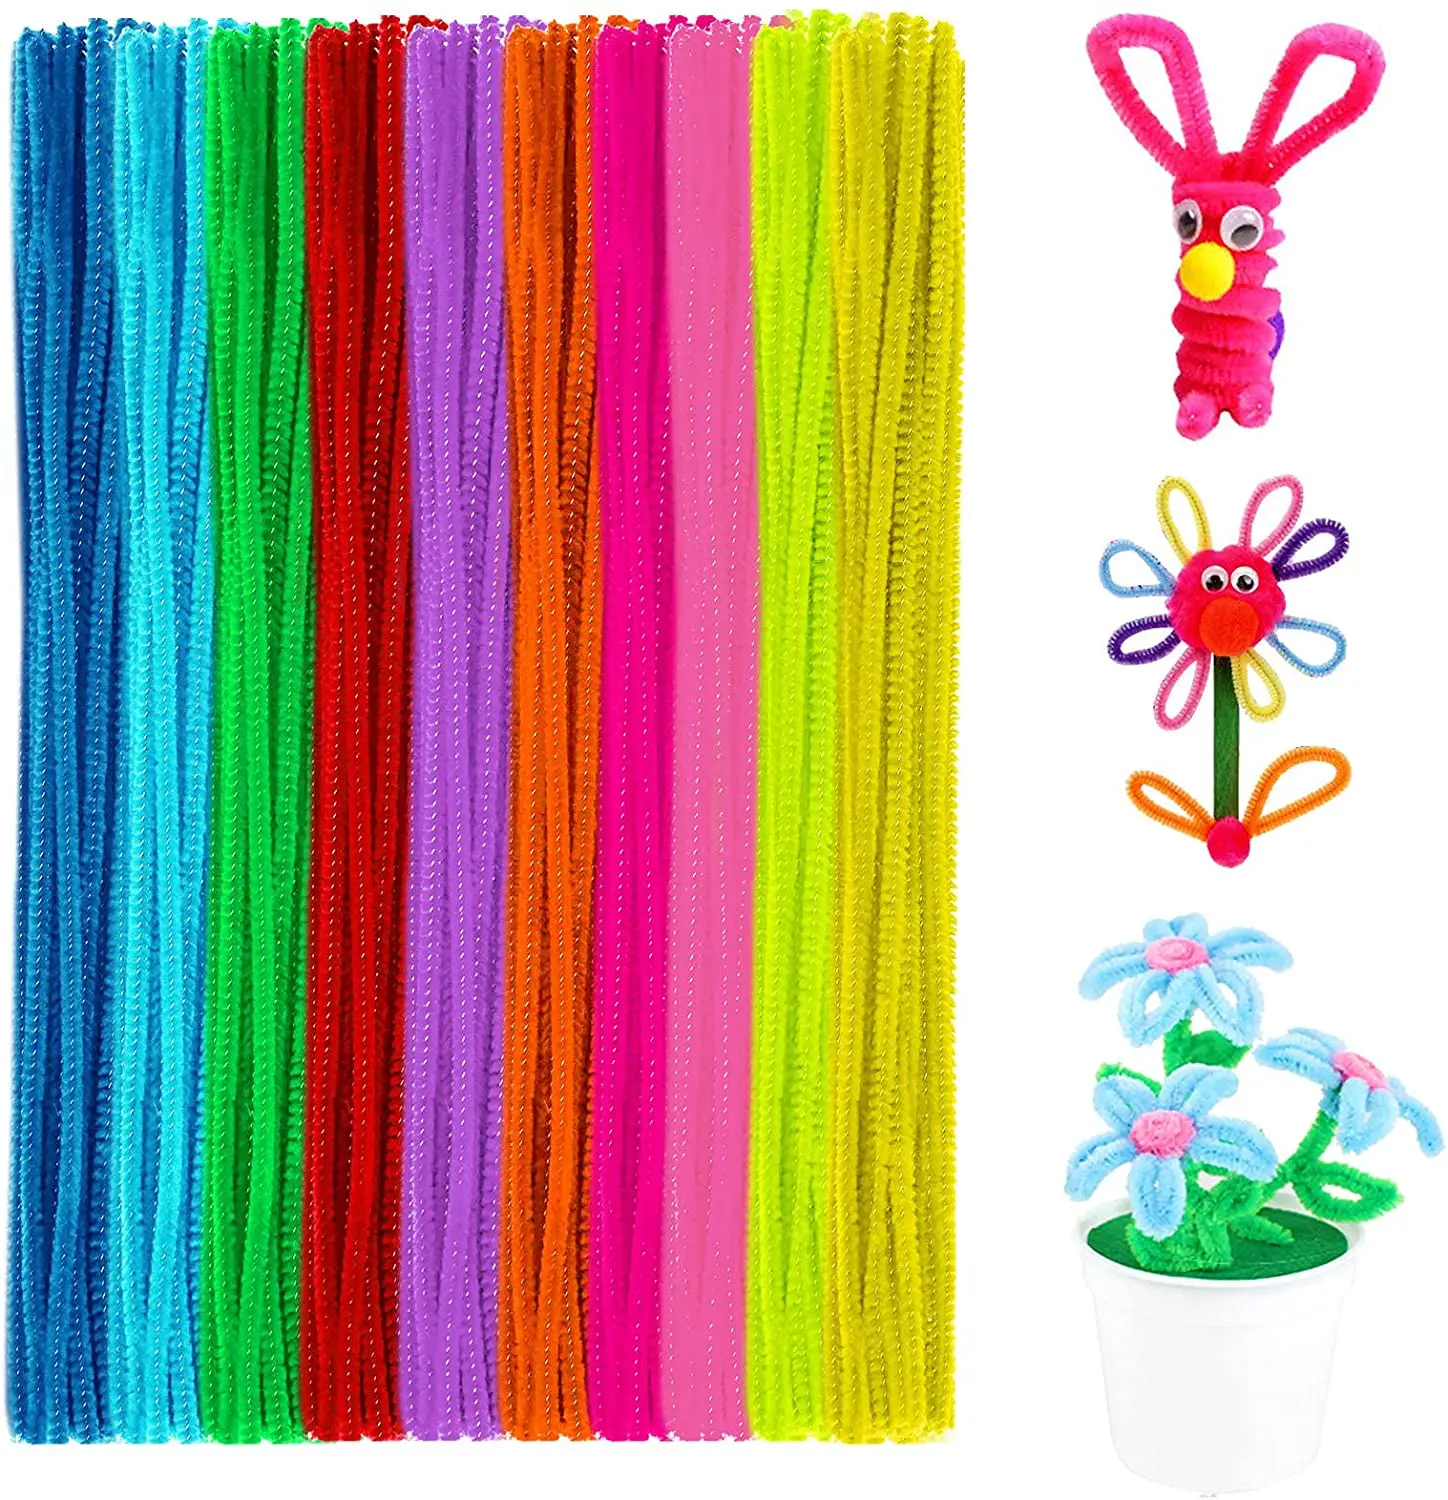 TOAOB 120pcs Bump Pipe Cleaners 12 Assorted Colors Chenille Stems Craft Supplies 13mm x 12 inch Fuzzy Bumpy Pipe Cleaners for DIY Art Creative Crafts Decorations 